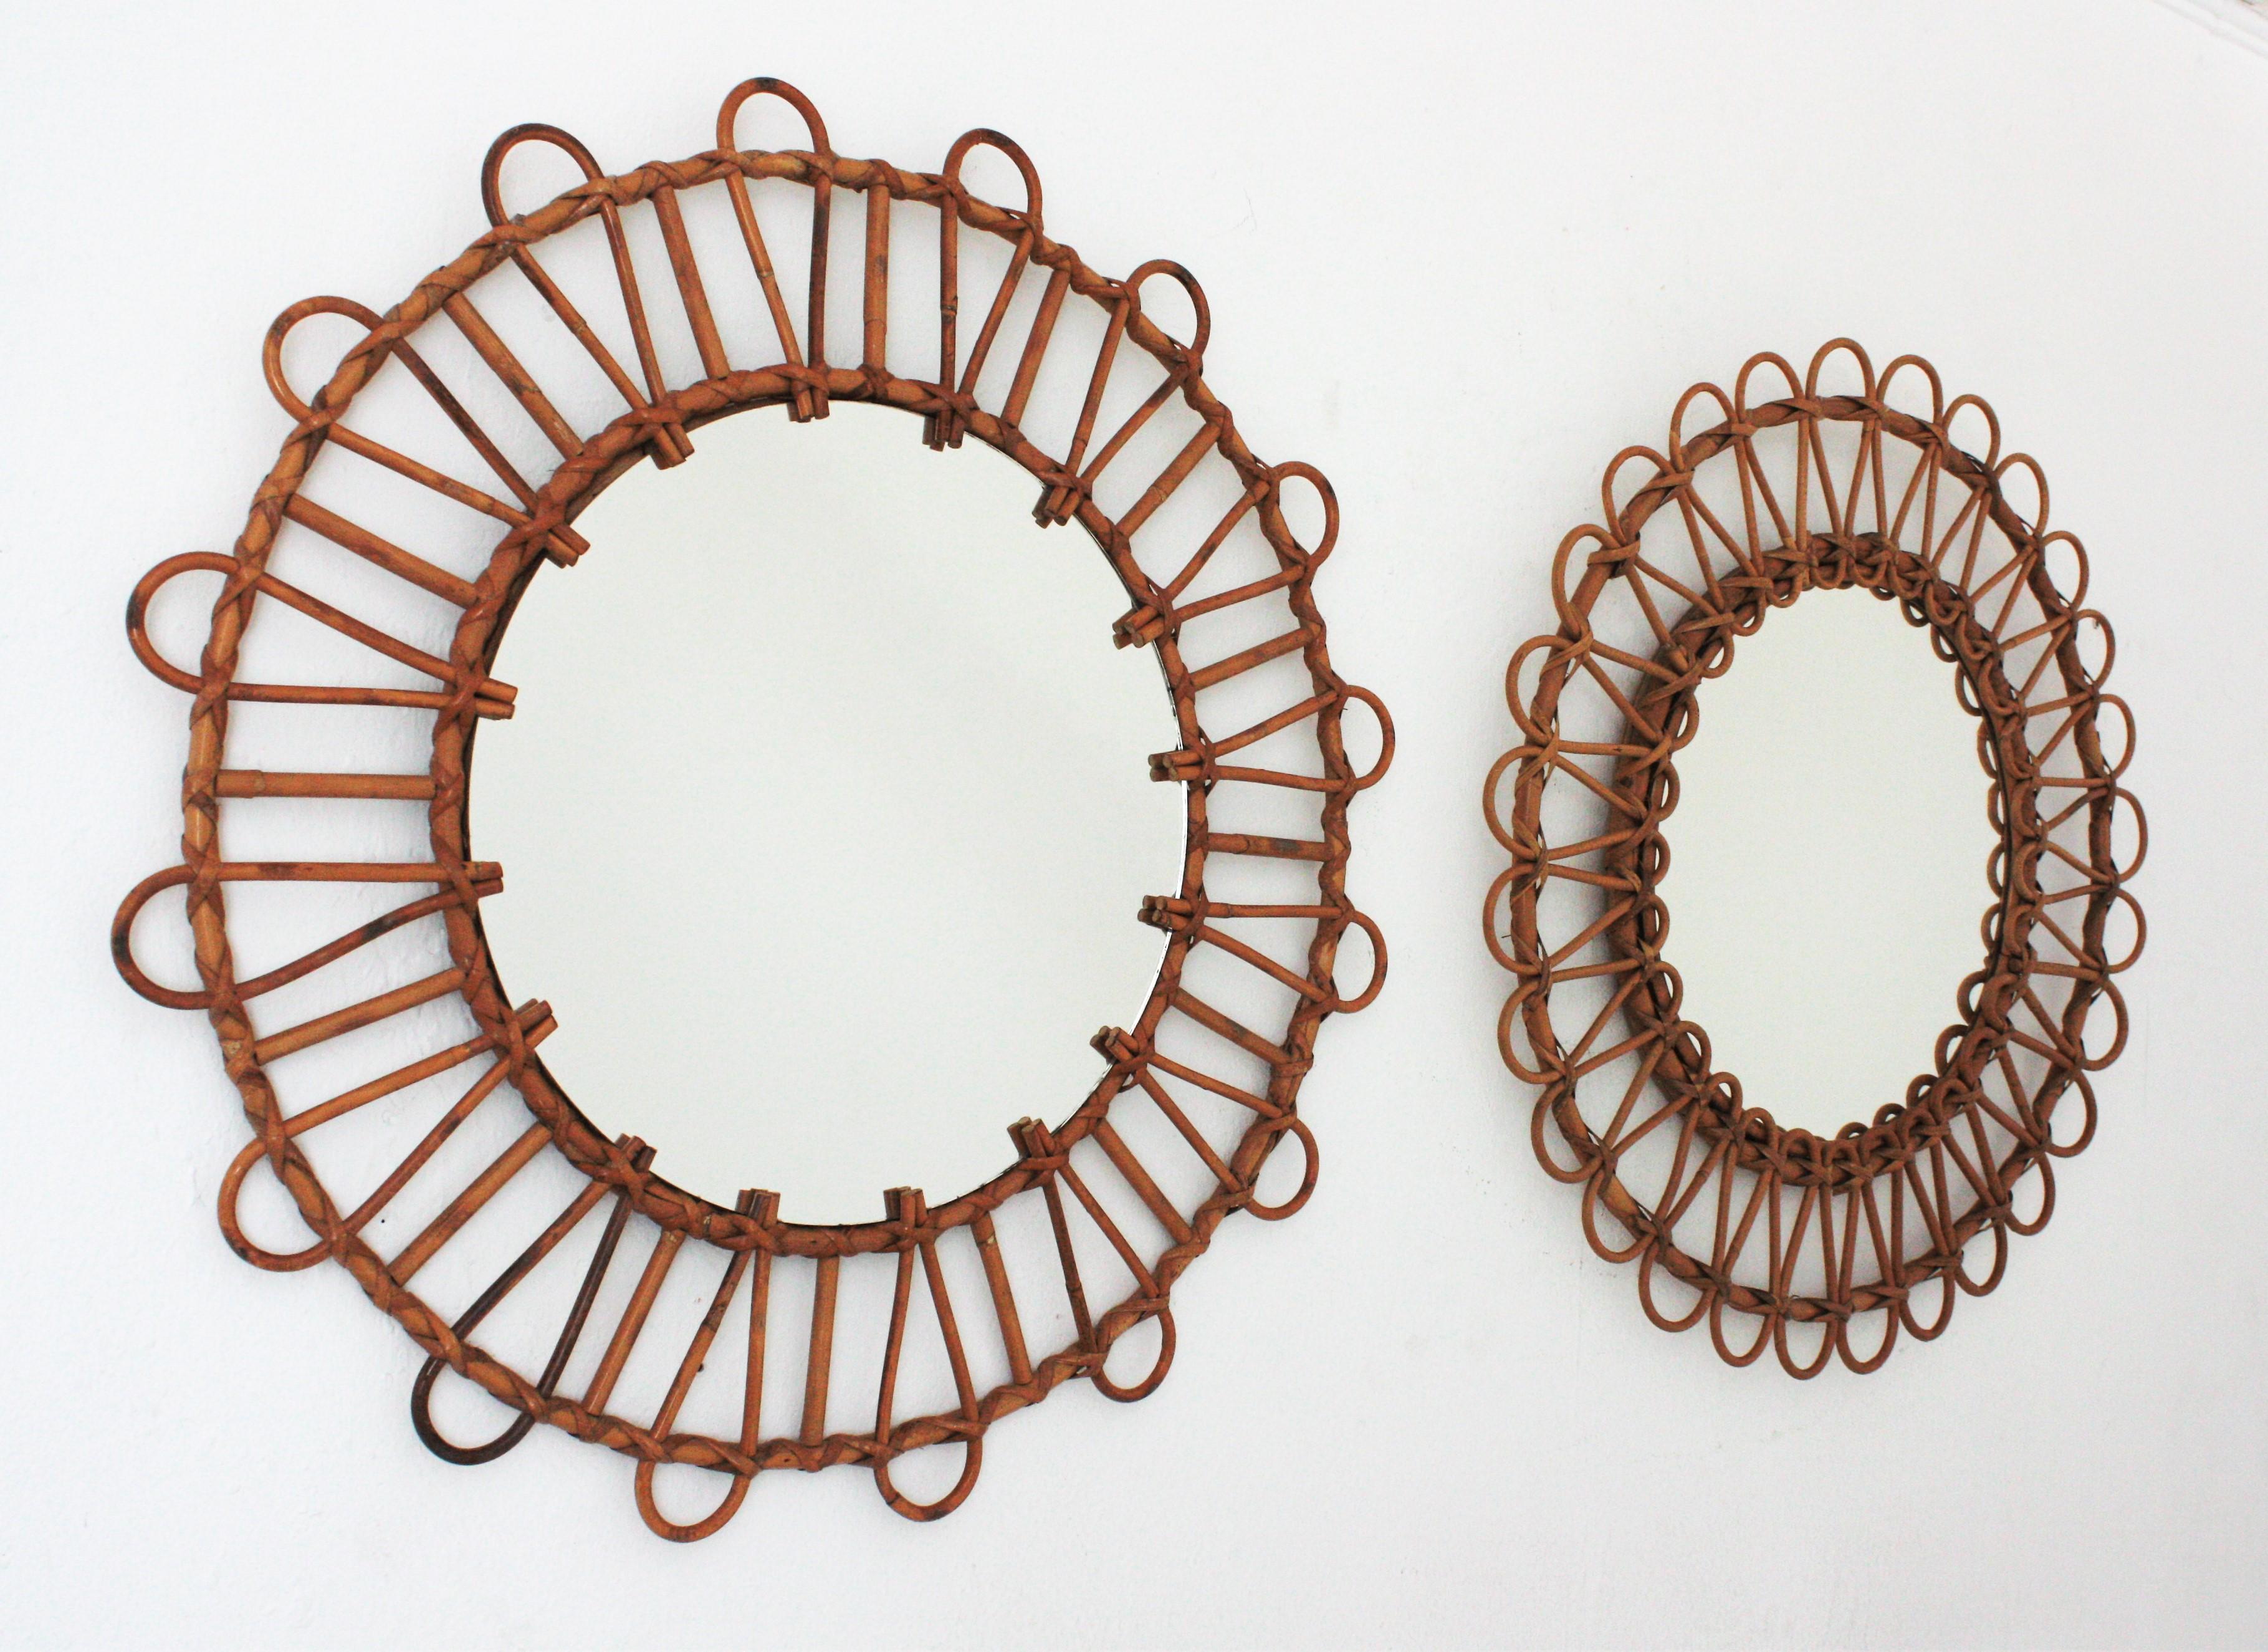 Beautiful unmatching pair of round rattan wall mirrors. Spain, 1960s
The set is comprised by two Mid-Century Modern round mirrors handcrafted with rattan and bamboo canes. Each one has a different design but similar size
Interesting to be used